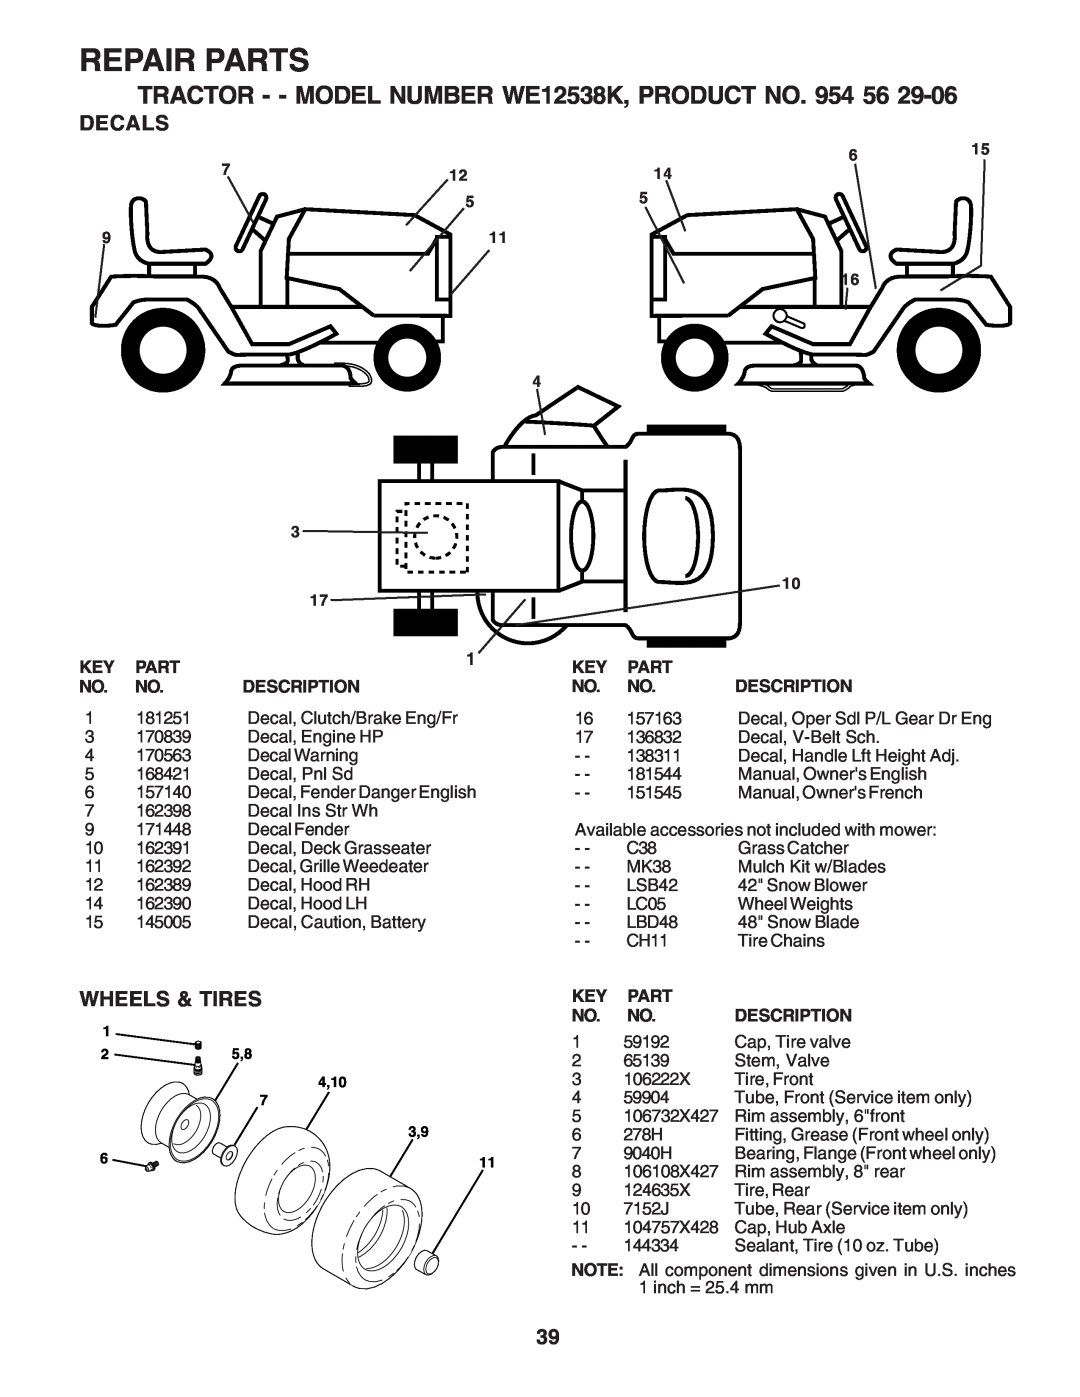 Weed Eater manual Decals, Wheels & Tires, Repair Parts, TRACTOR - - MODEL NUMBER WE12538K, PRODUCT NO. 954, 4,10 